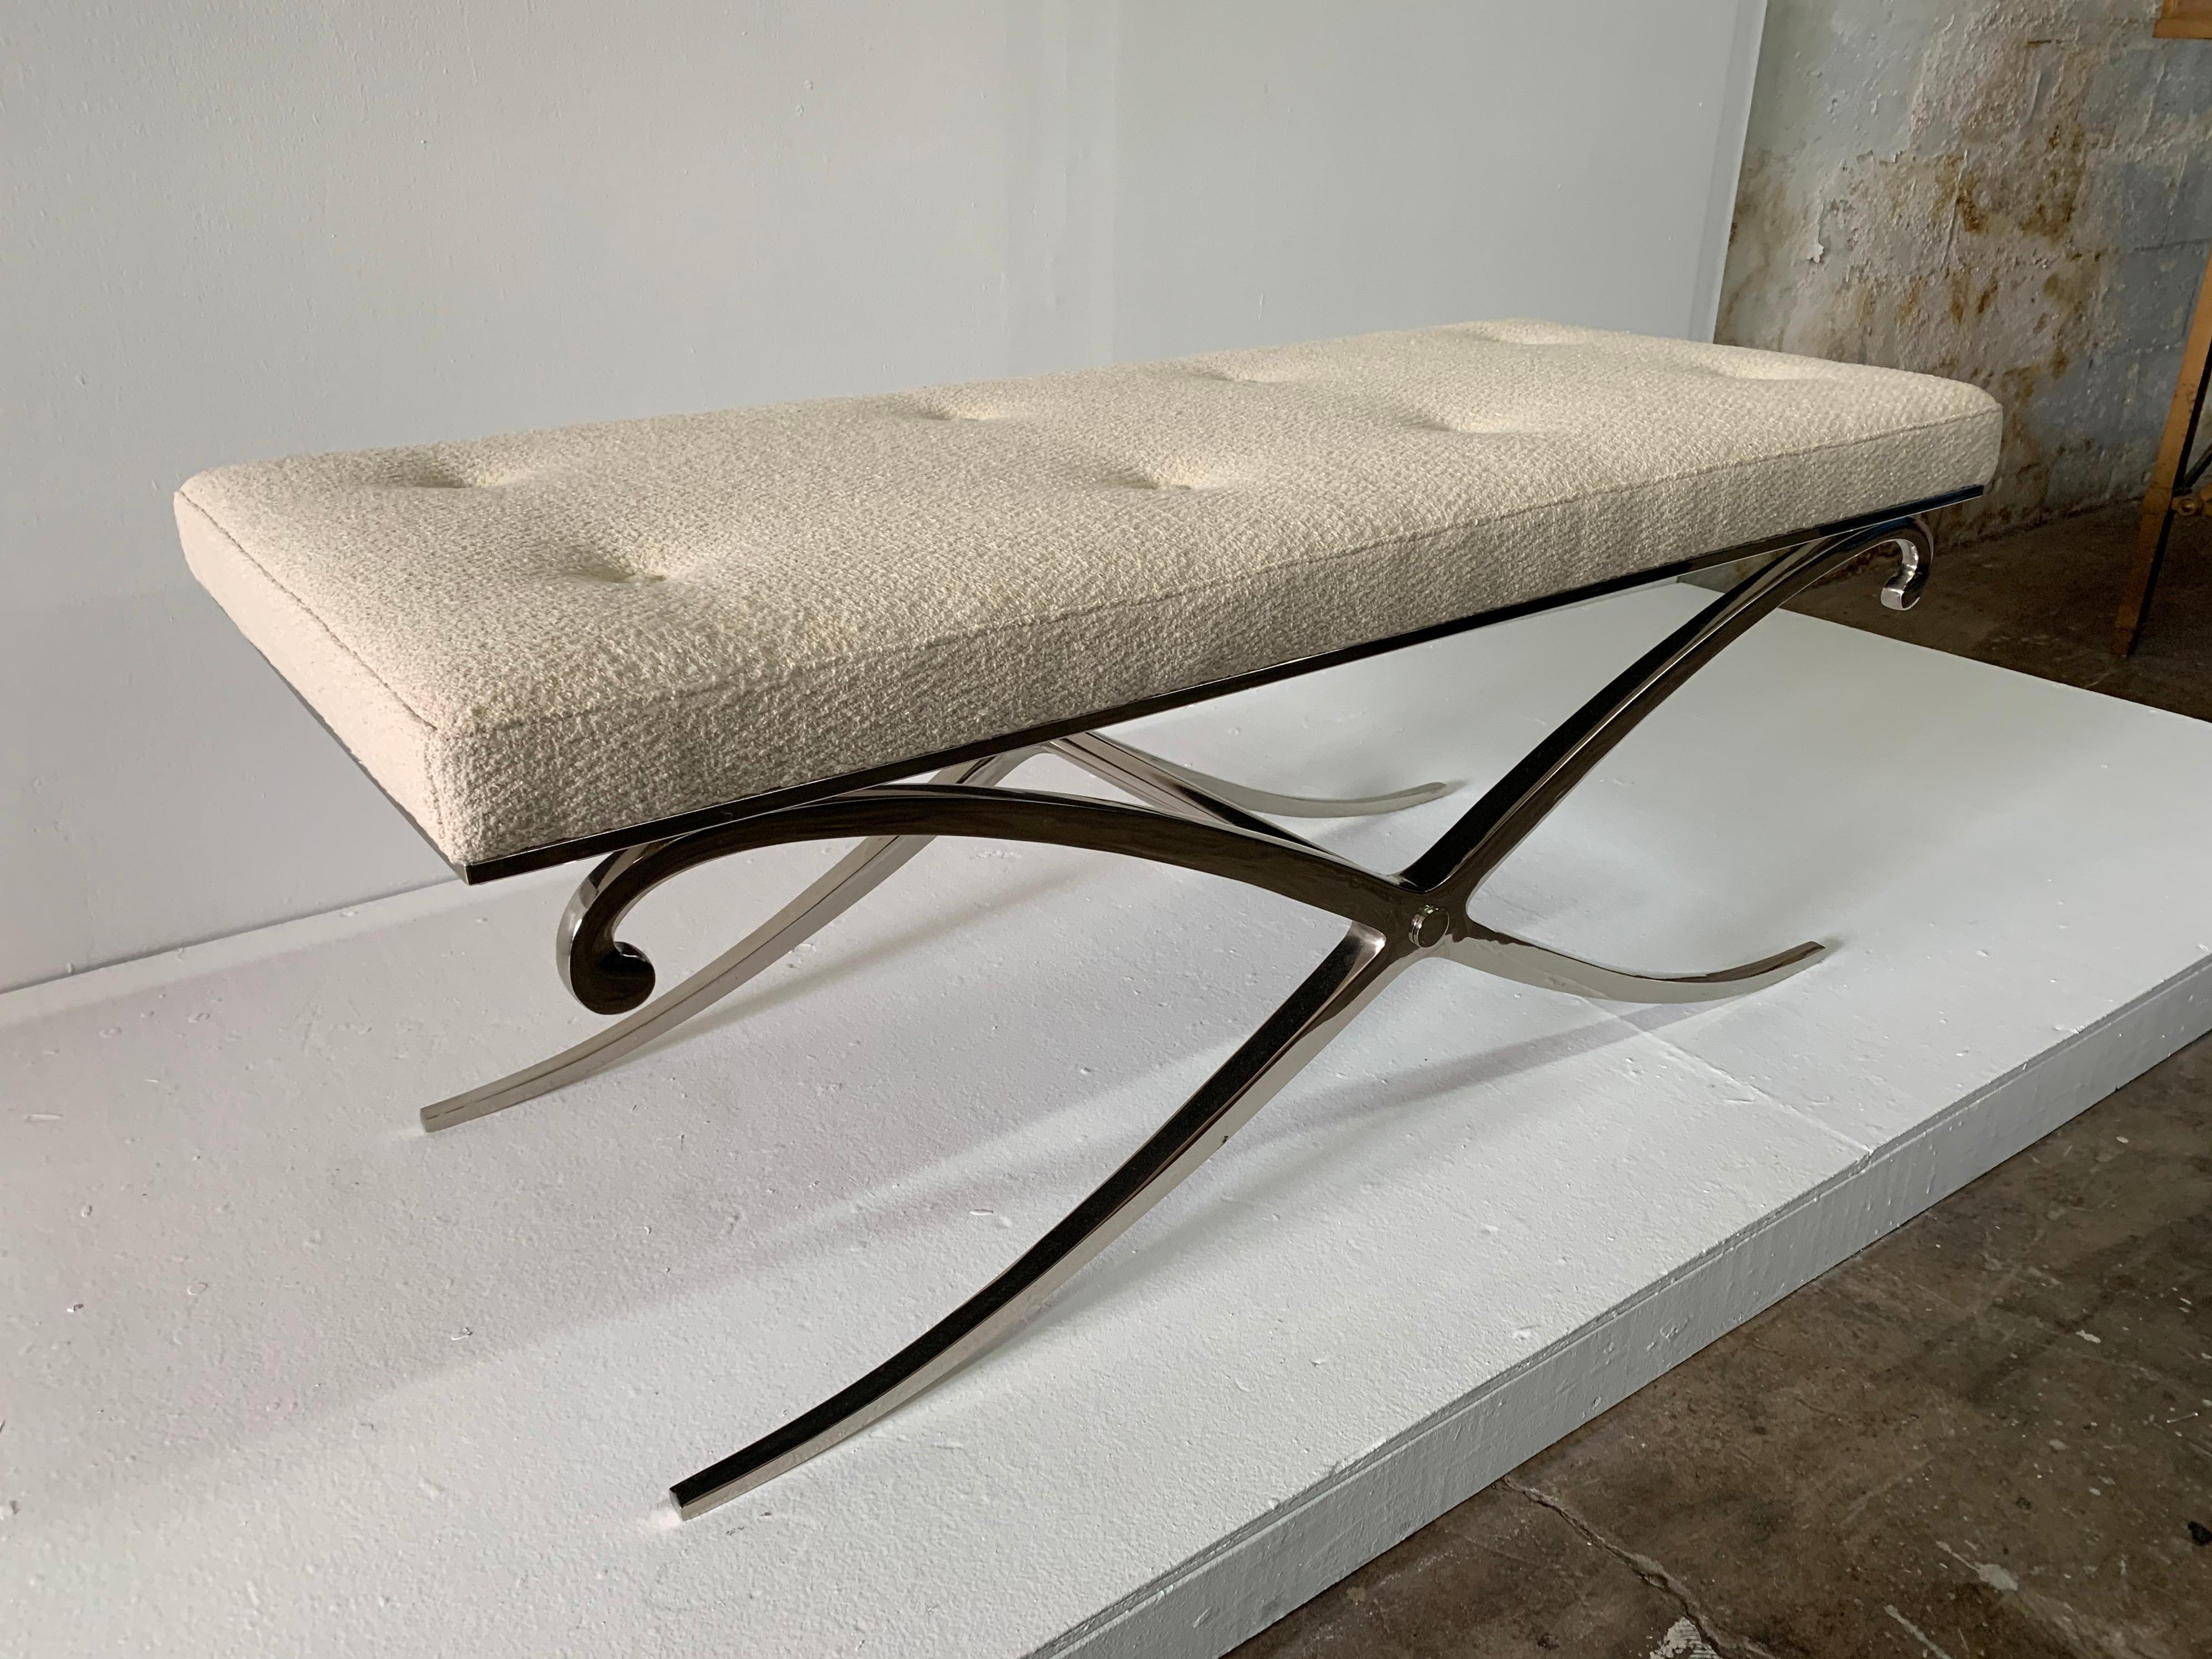 This heavy and important elegant X base in polished steel framed long bench is reupholstered in a luxurious off-white bouclé fabric. This is ready to place in your space.